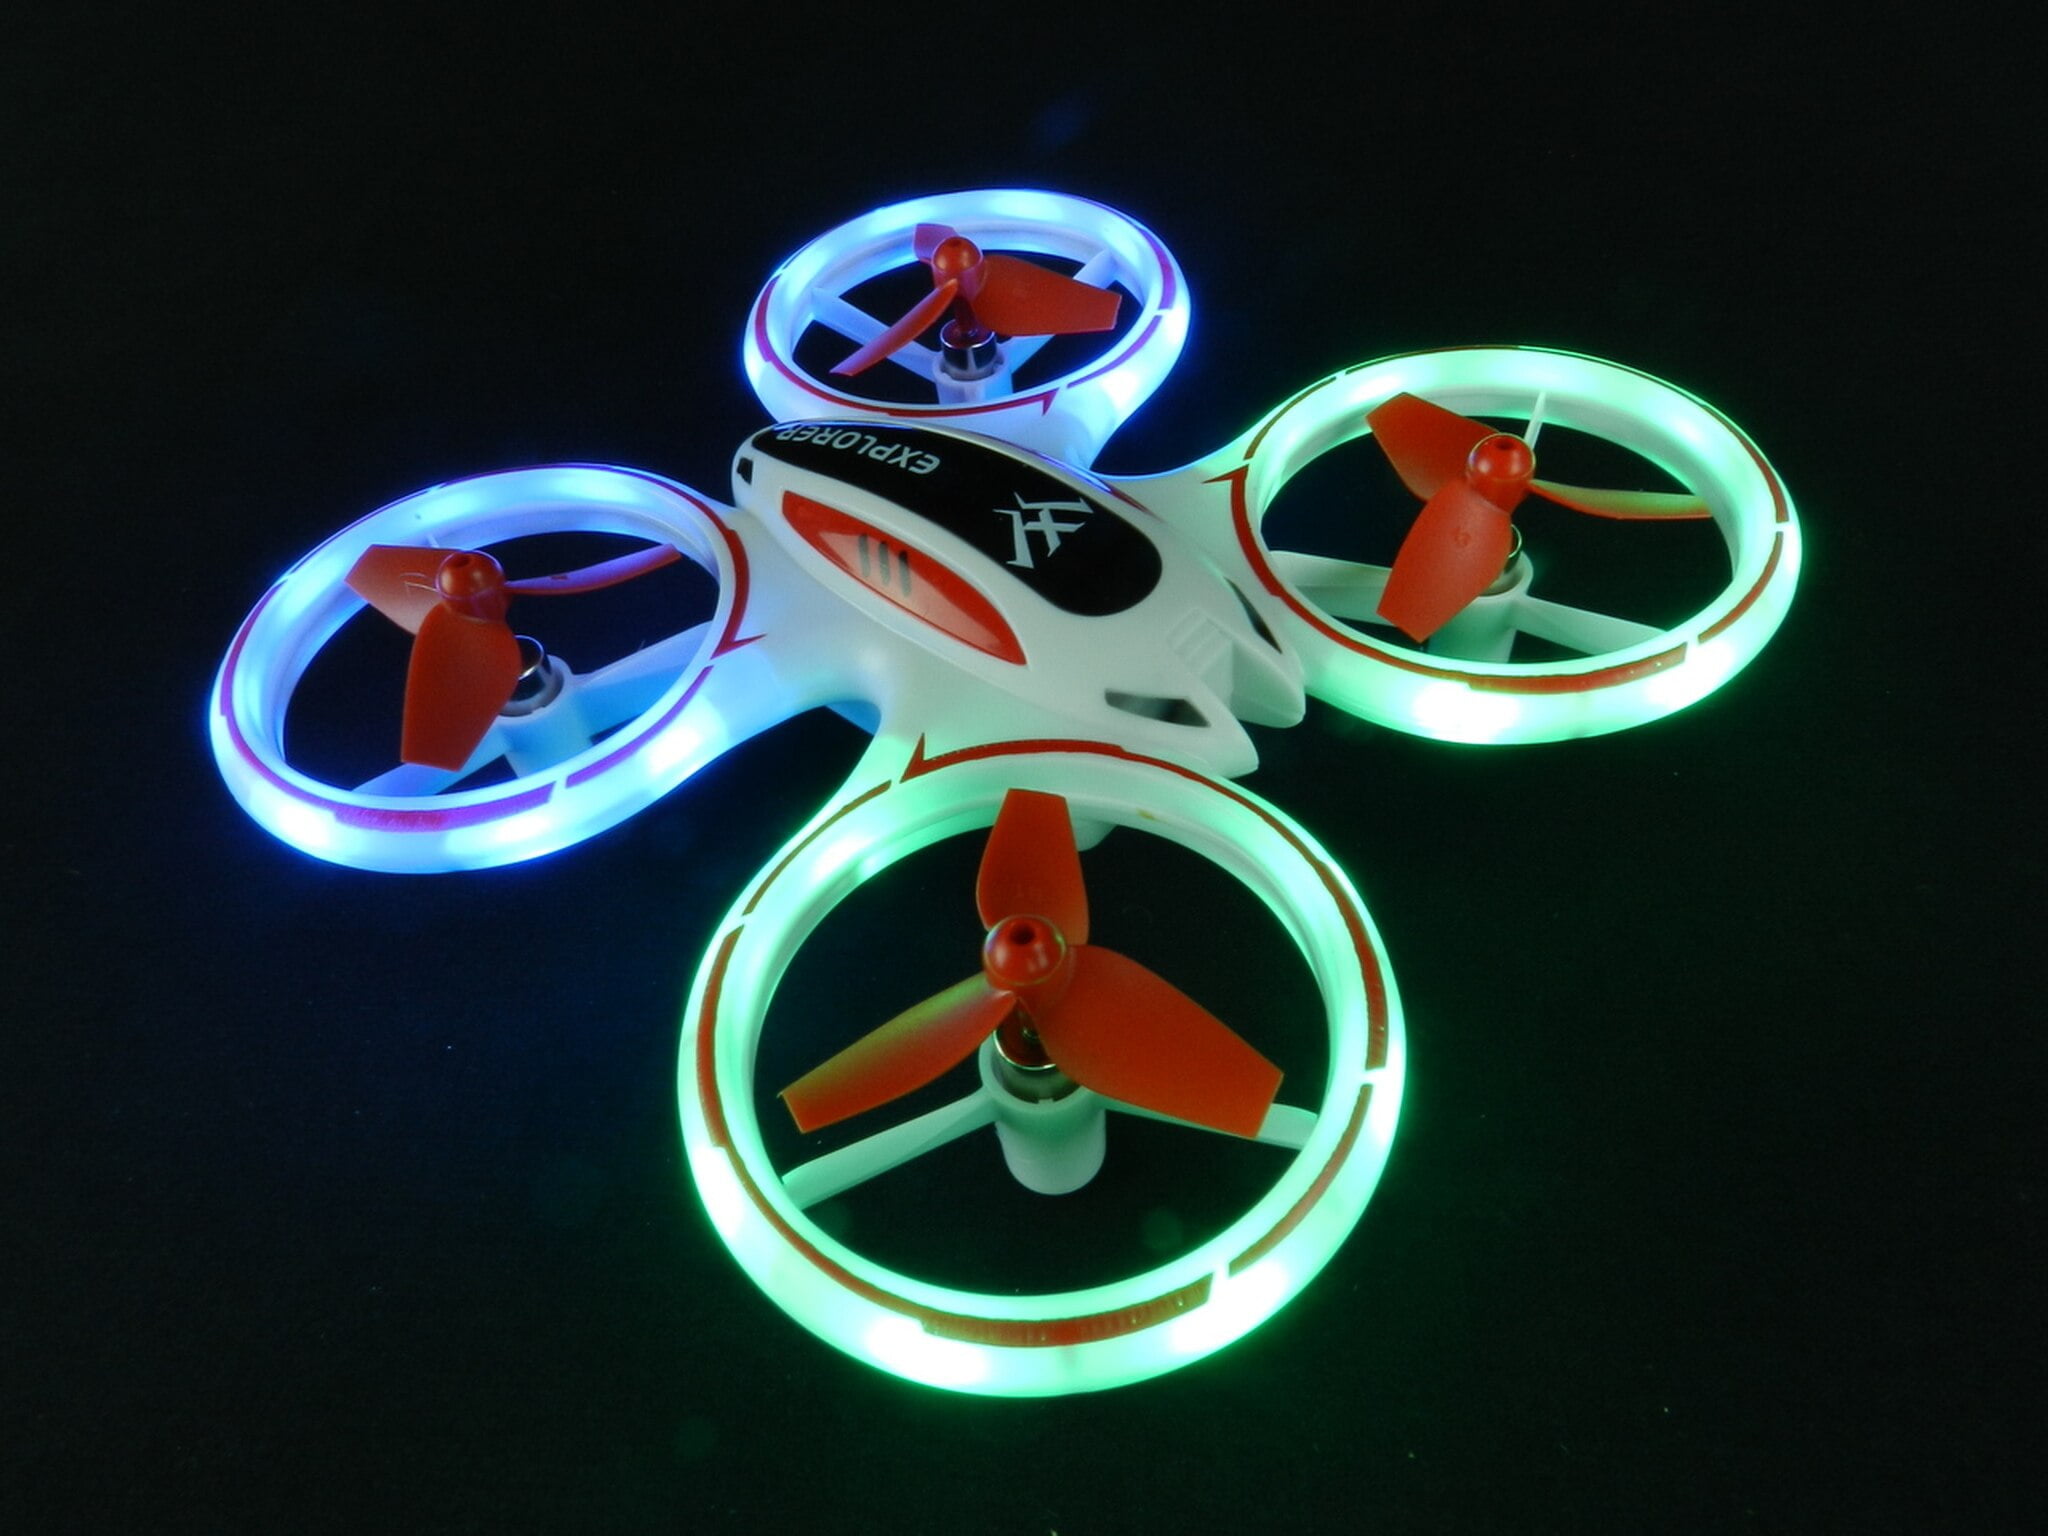 Drone de course with led lights on Craiyon